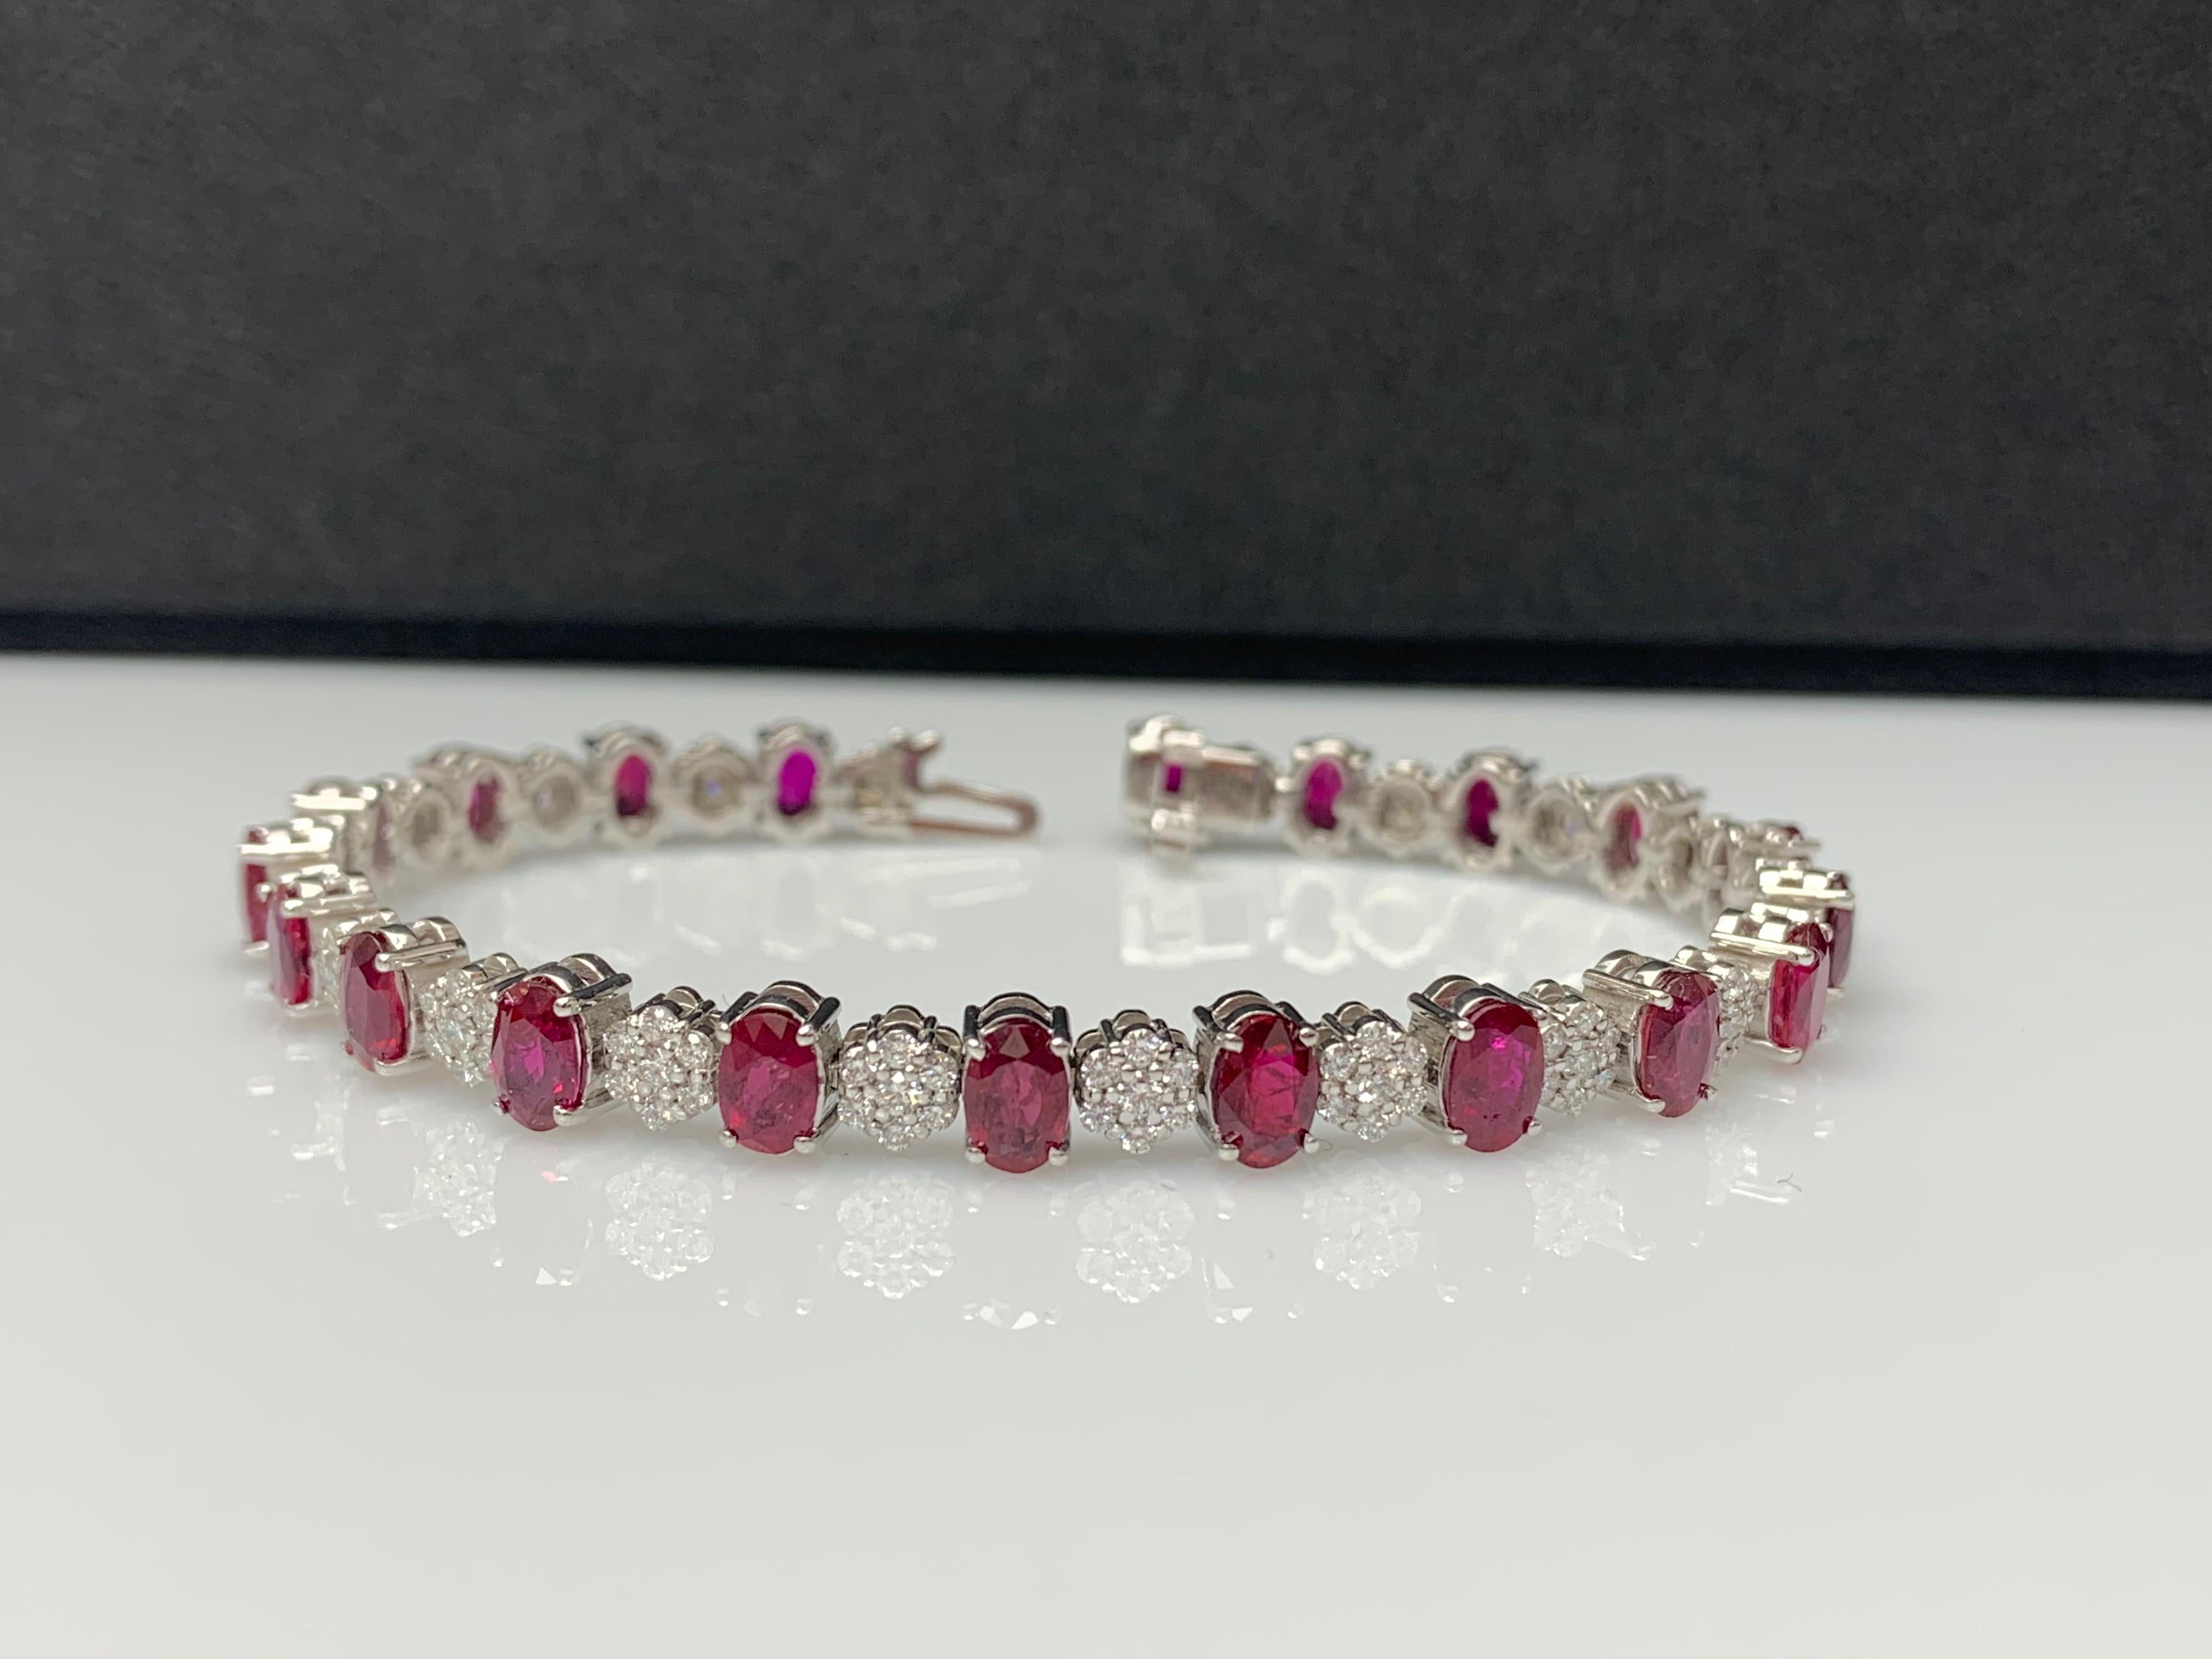 10.34 Carat Oval Cut Ruby and Diamond Tennis Bracelet in 14K White Gold For Sale 1